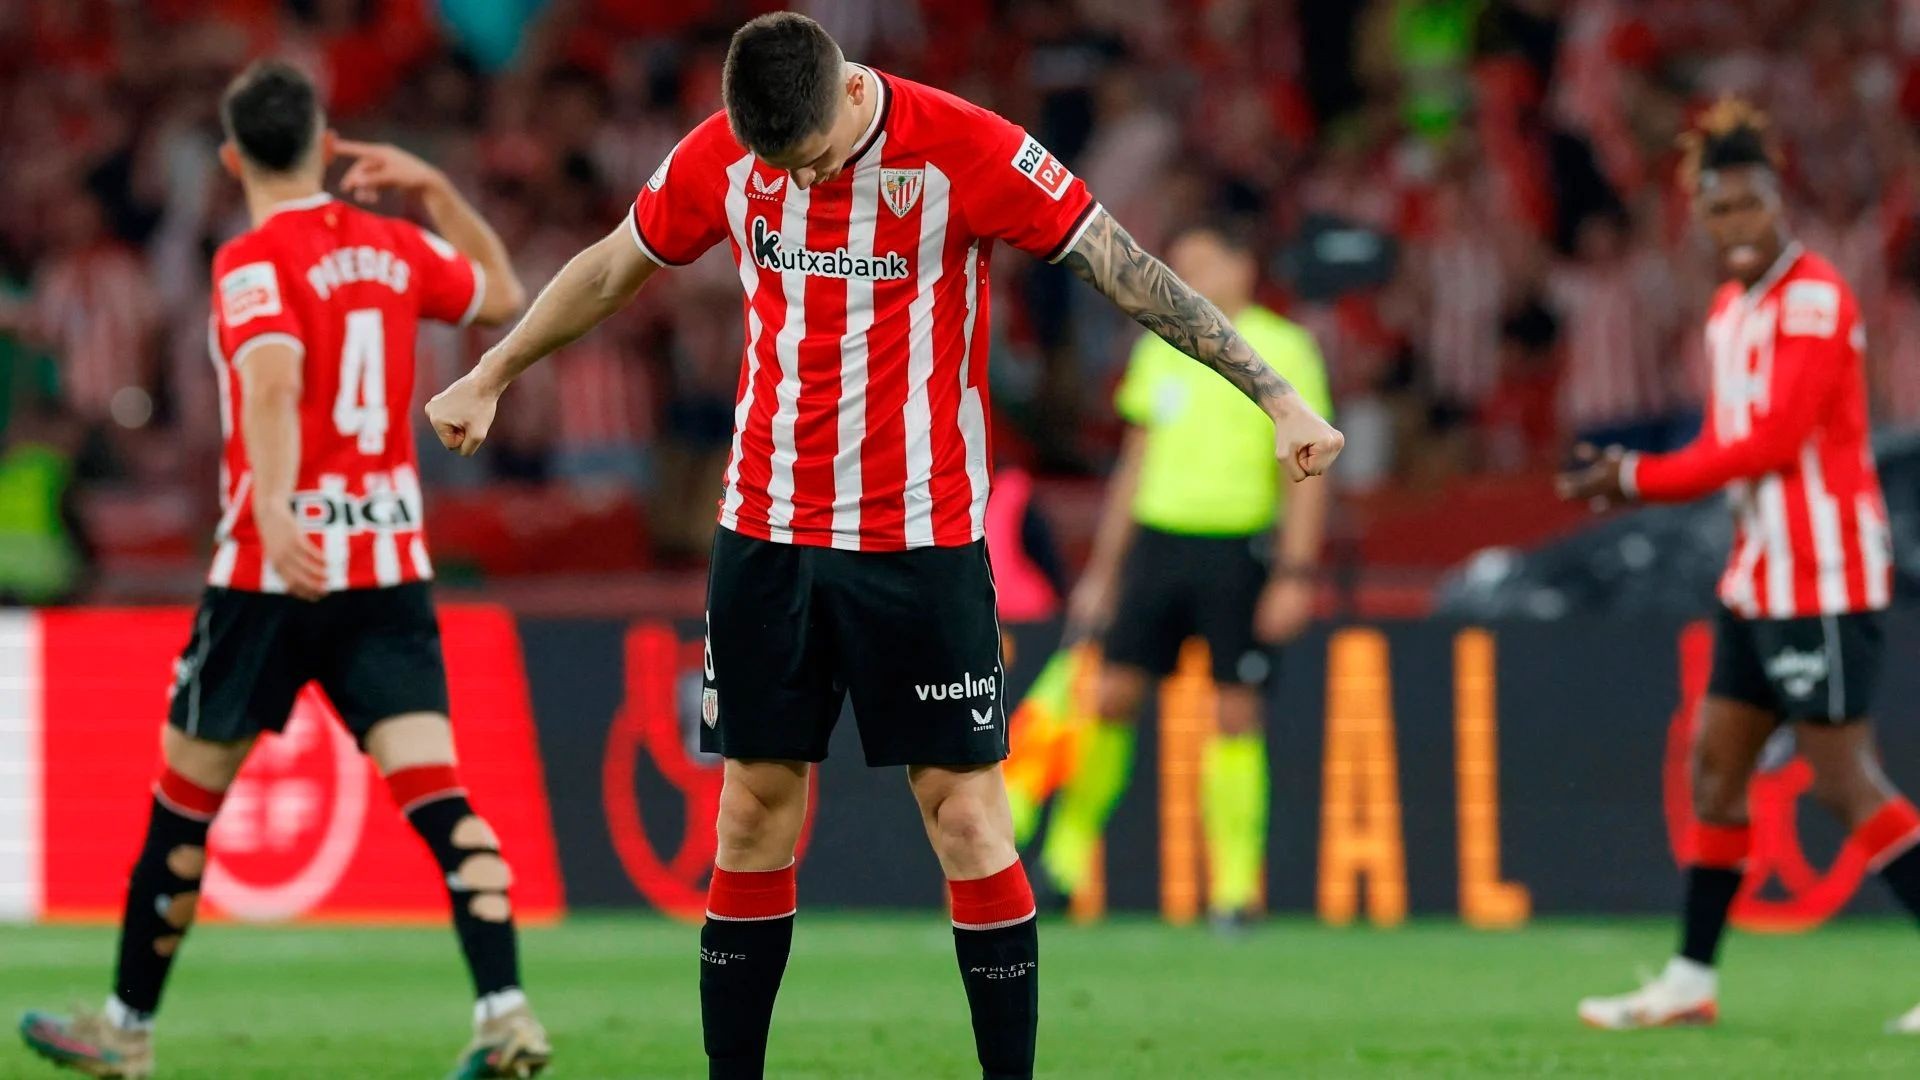 Watch Athletic Bilbao vs Mallorca full match replay and highlights